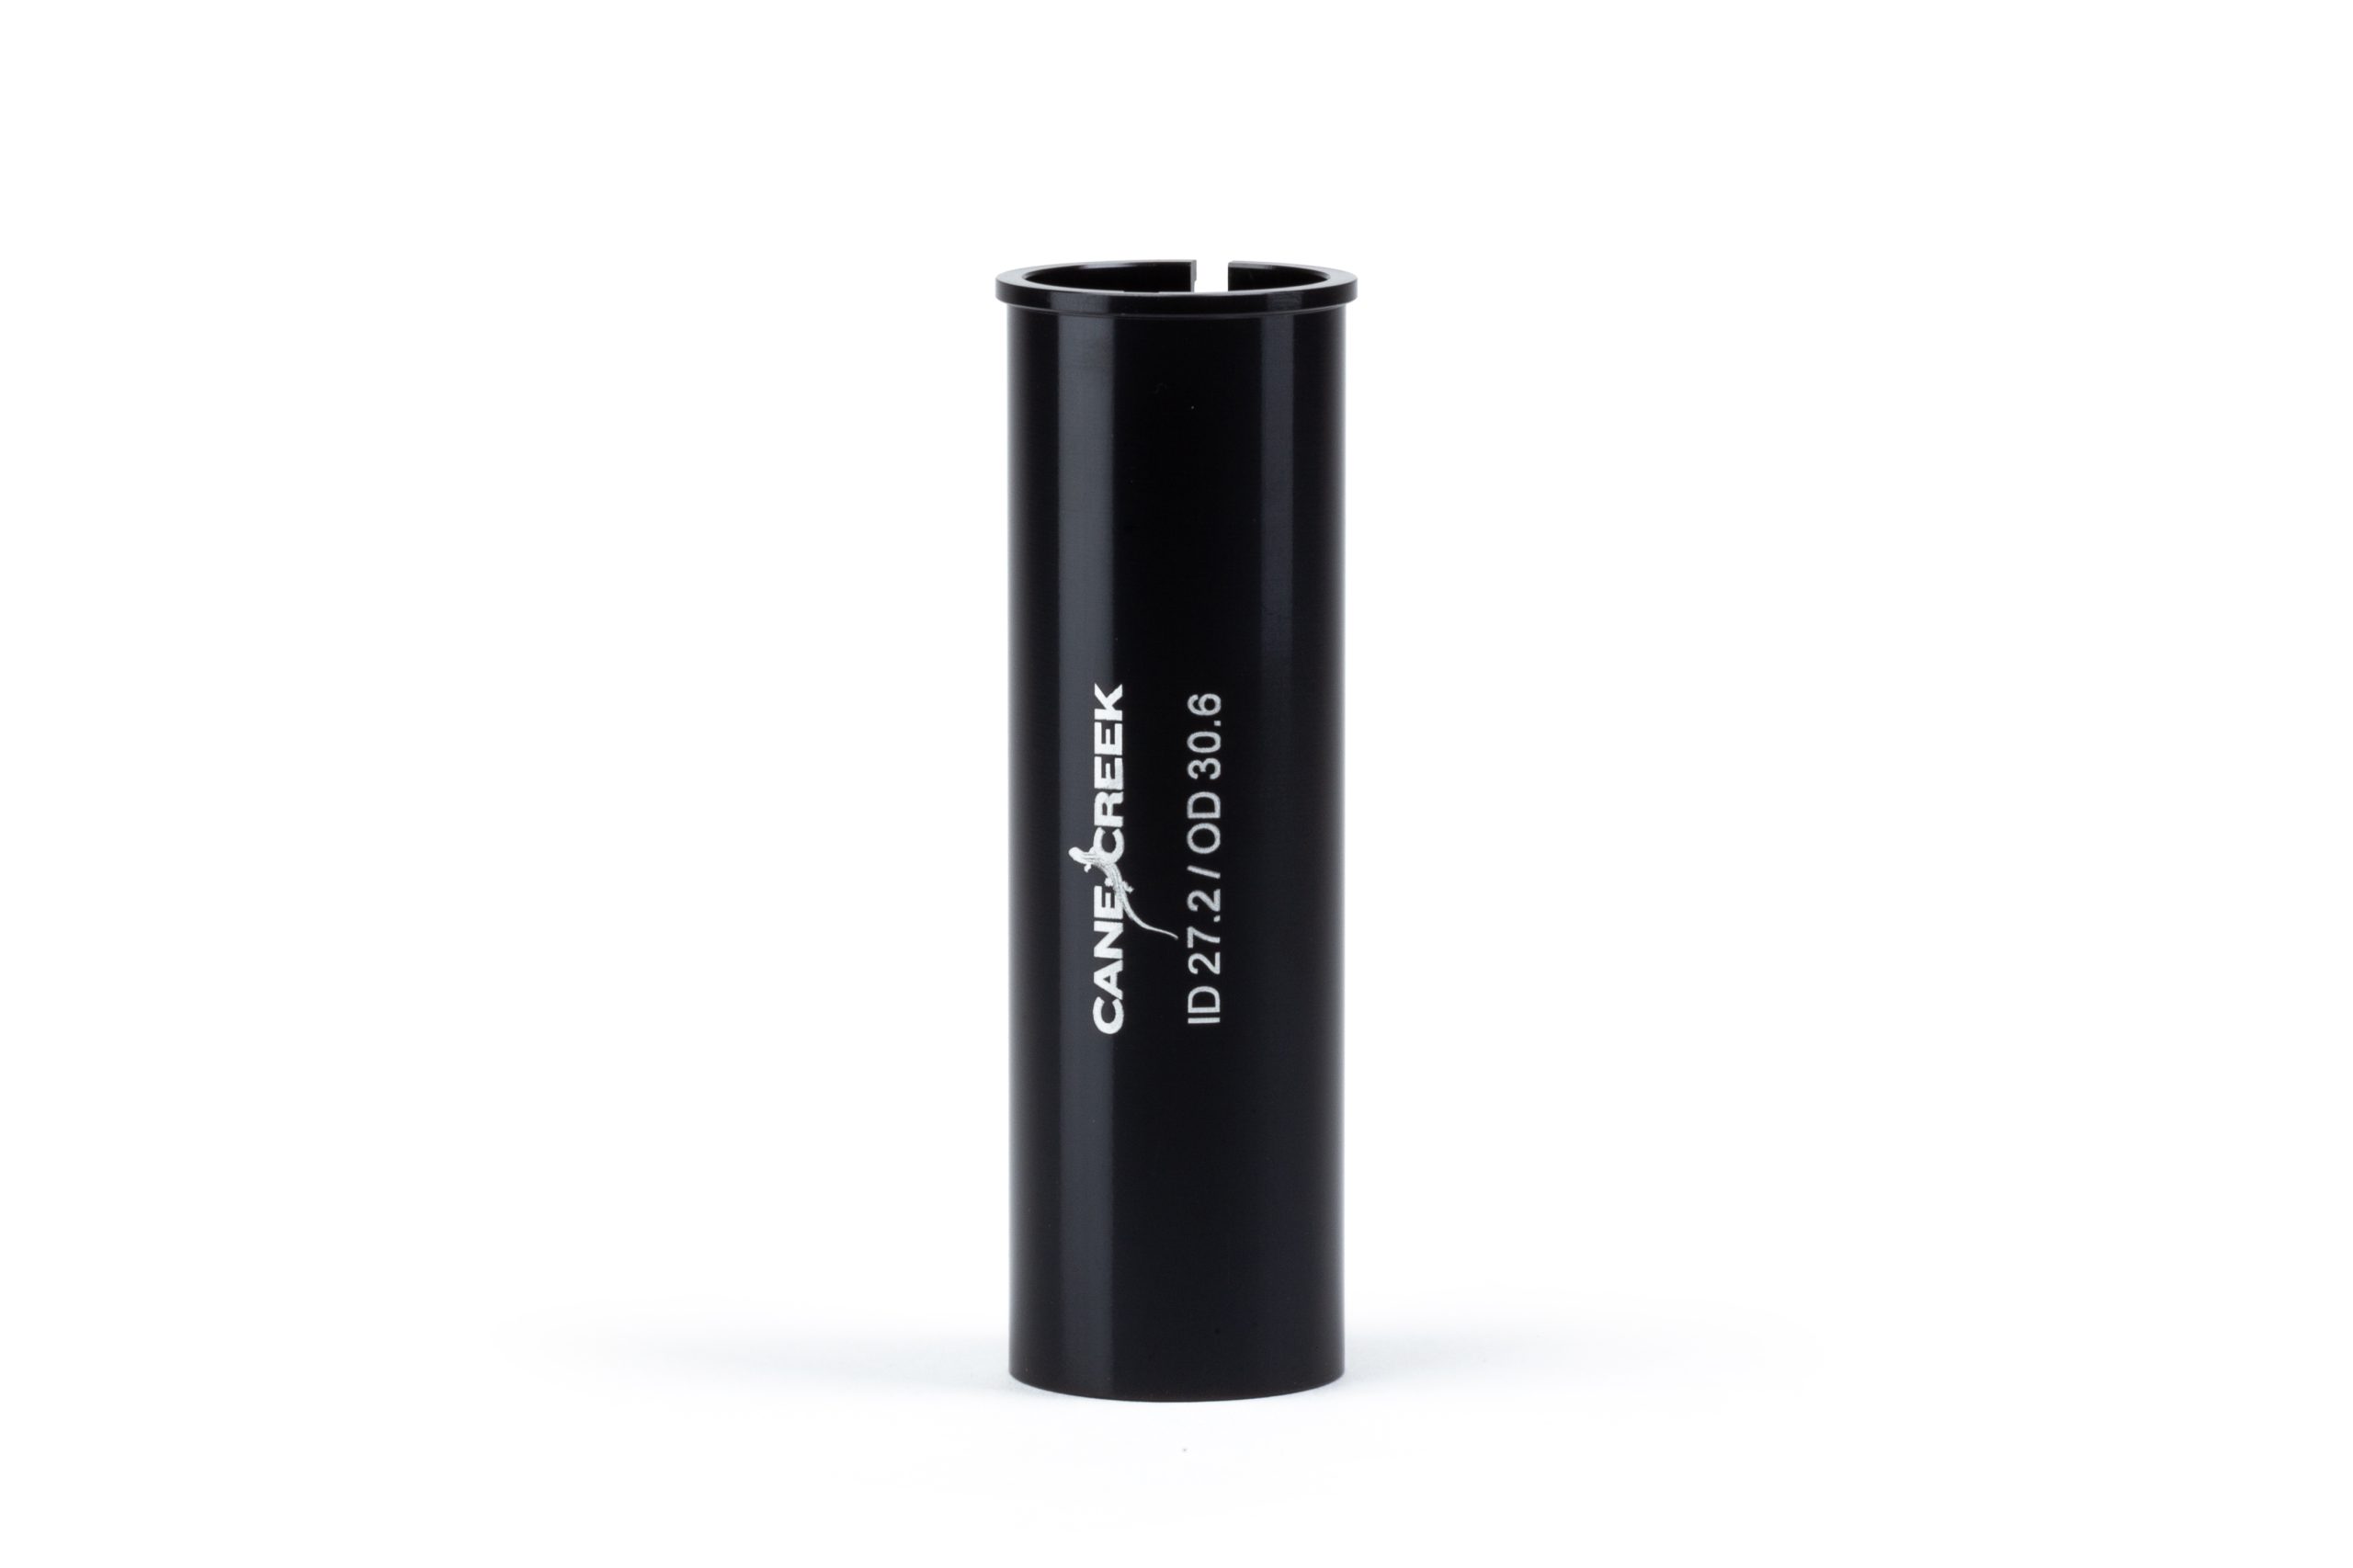 Seatpost Adapter - 27.2mm to 30.4mm - .ST27304 - Cane Creek